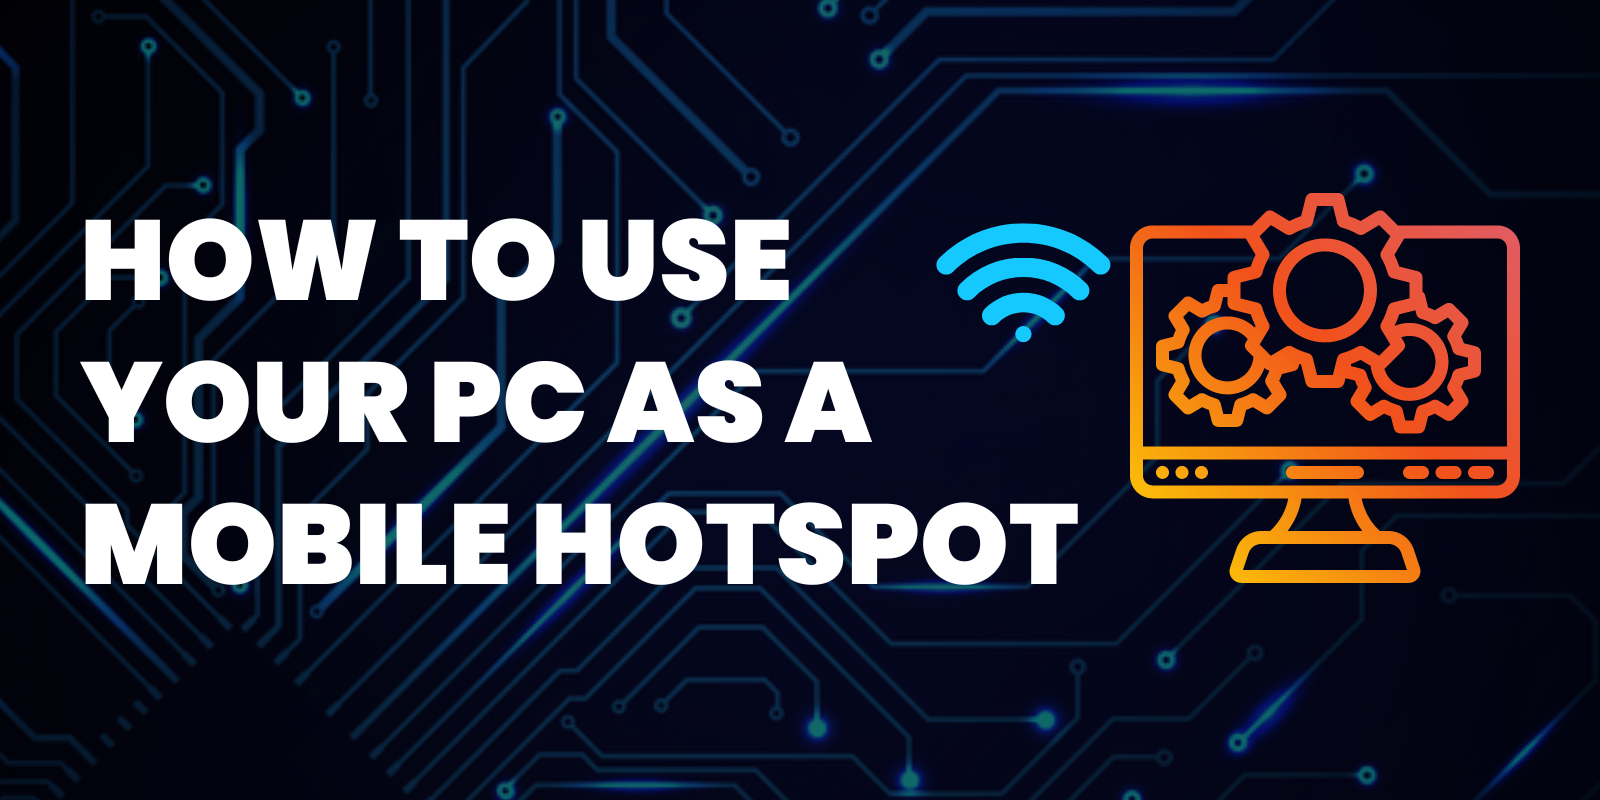 How to Use Your PC as a Mobile Hotspot (Infographic)